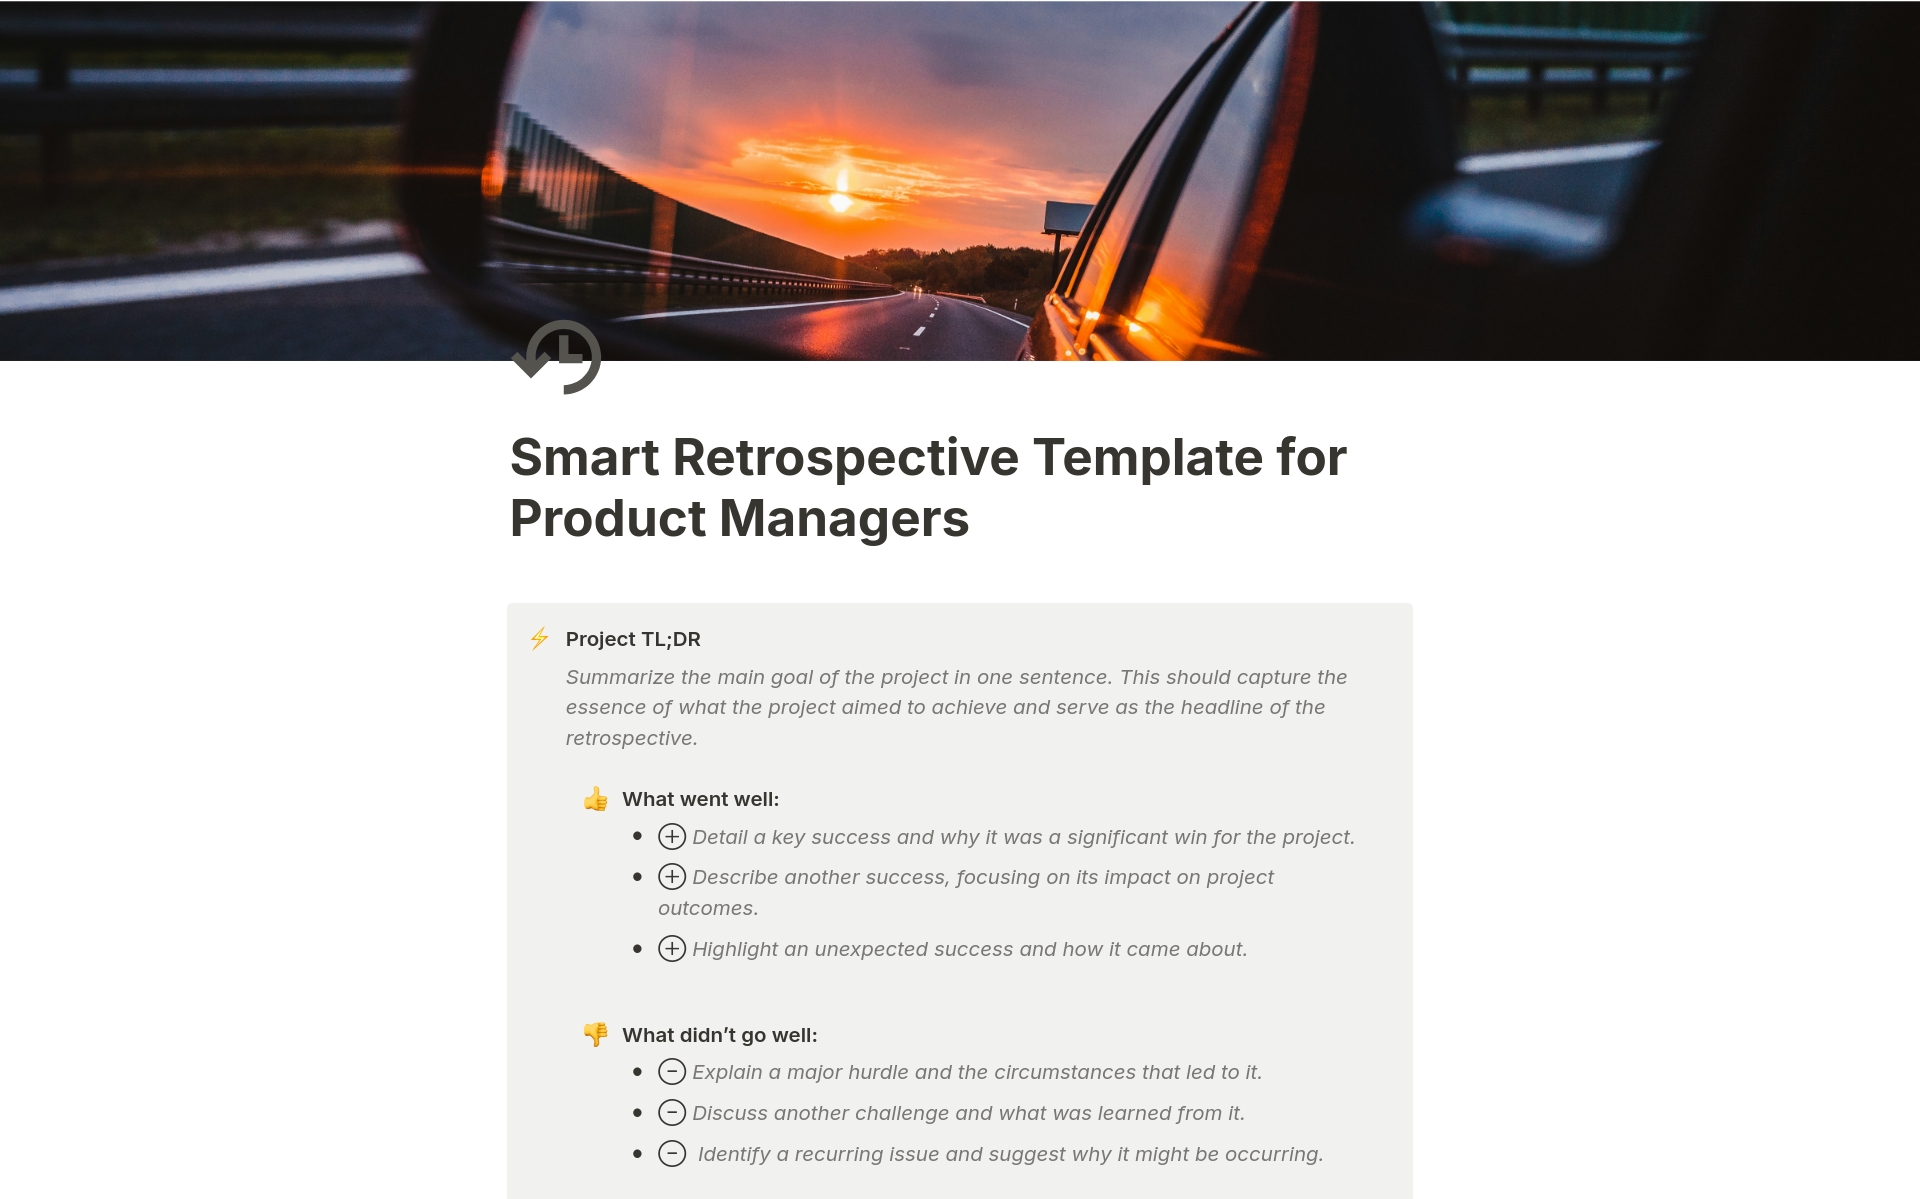 Optimize your project retrospectives with the Smart Retrospective Framework, specifically designed for iterative product managers. This comprehensive framework facilitates thorough reviews, enabling you to delve deep into project successes, challenges, and lessons learned.